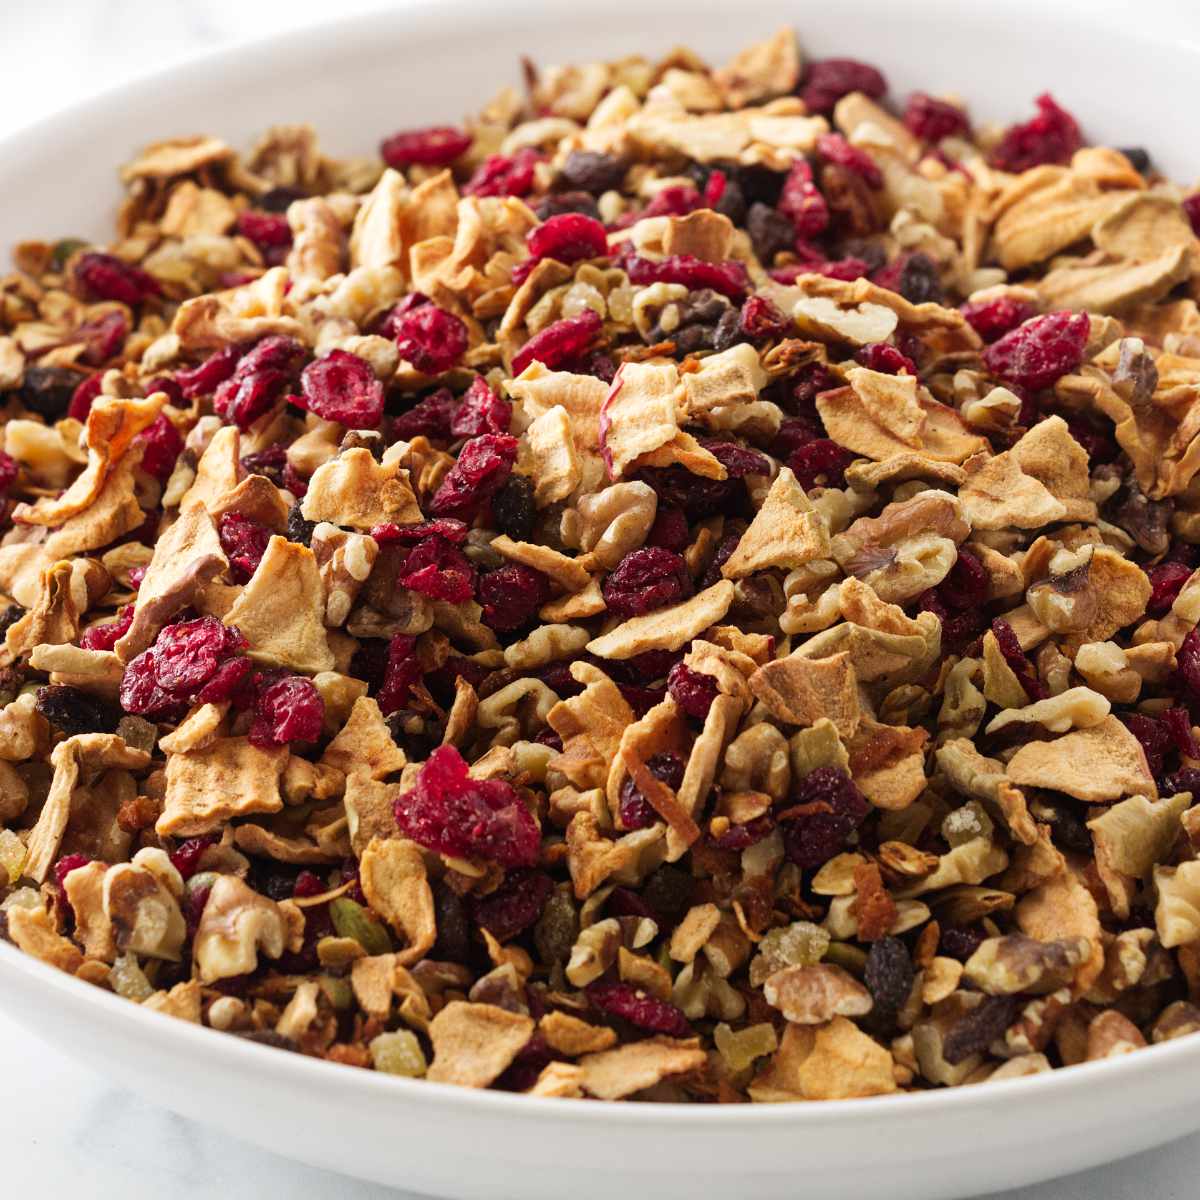 A bowl of granola with apples and cranberries.